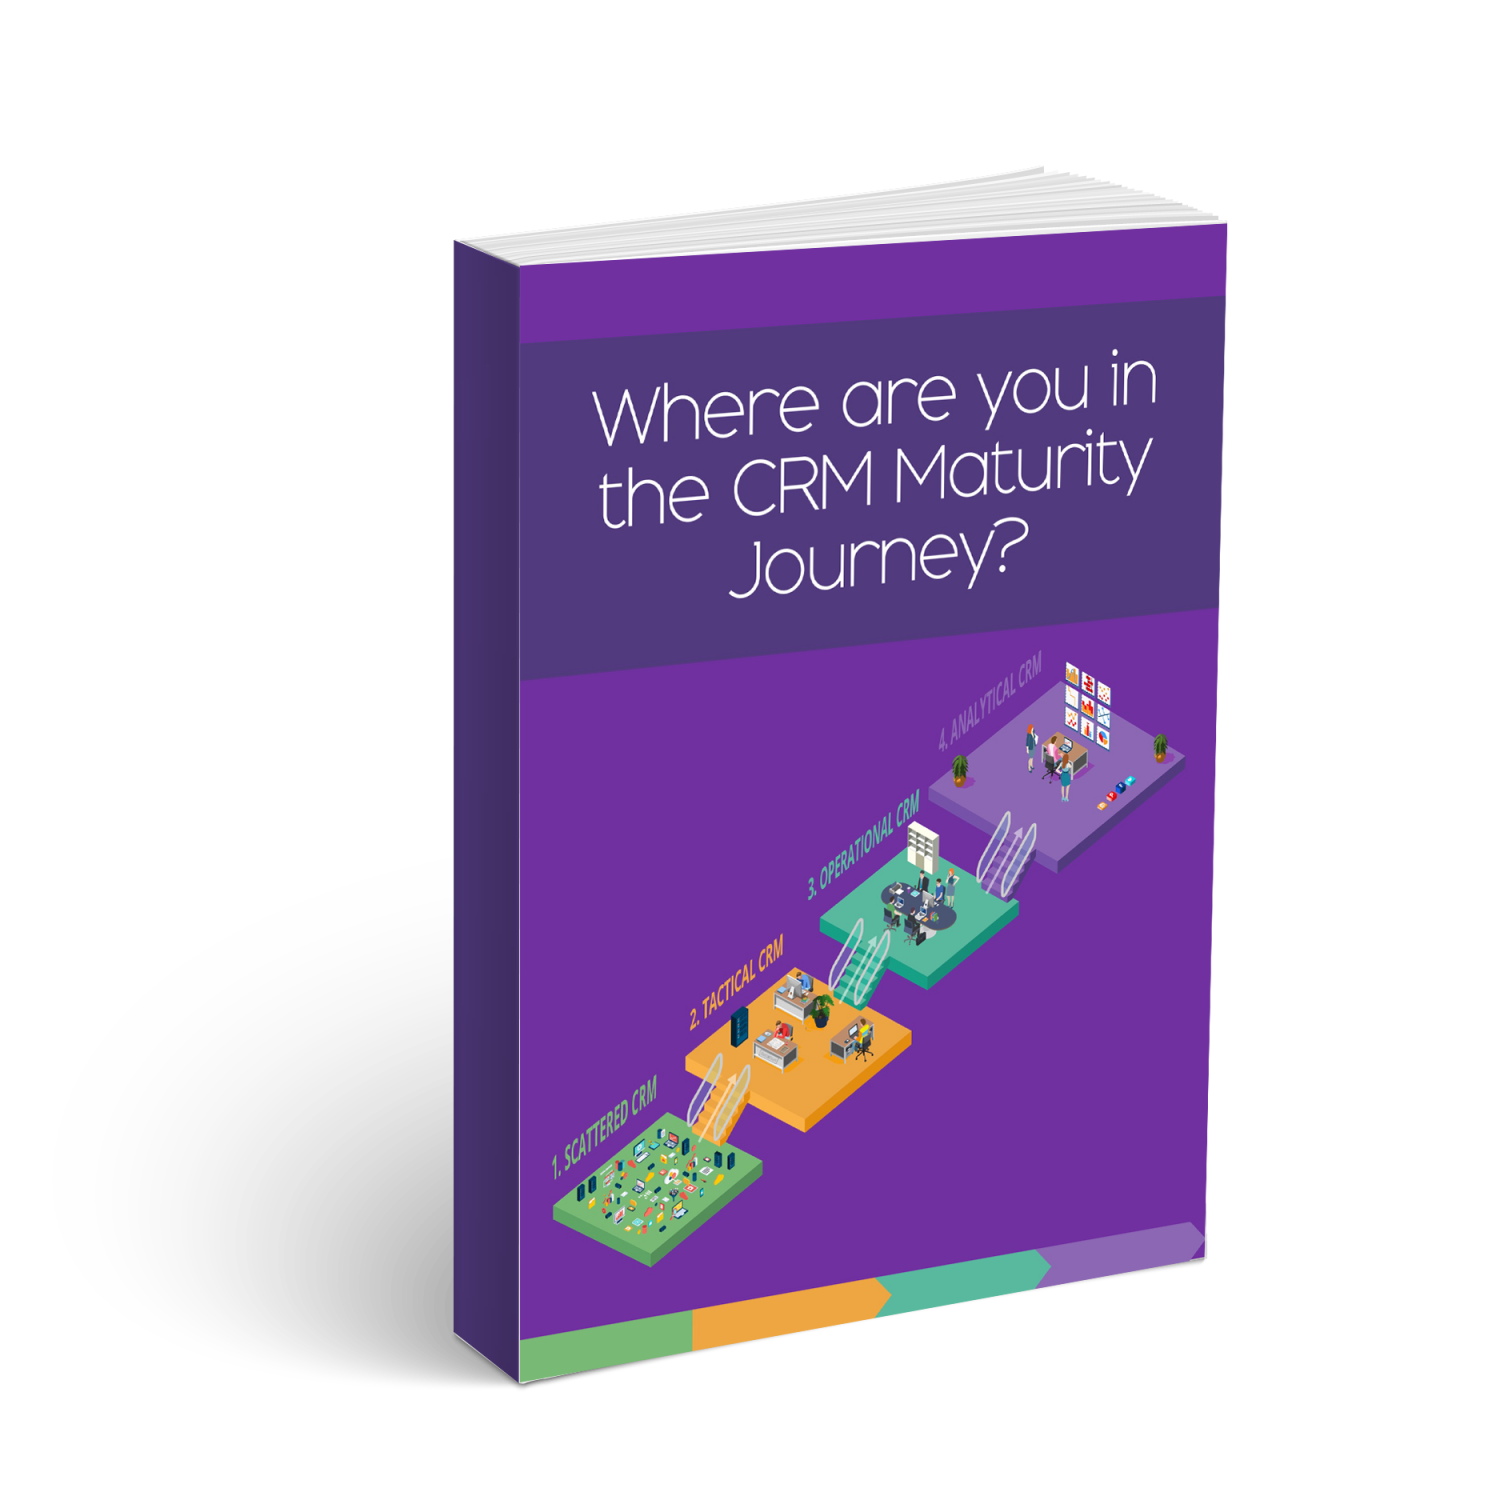 The CRM maturity journey